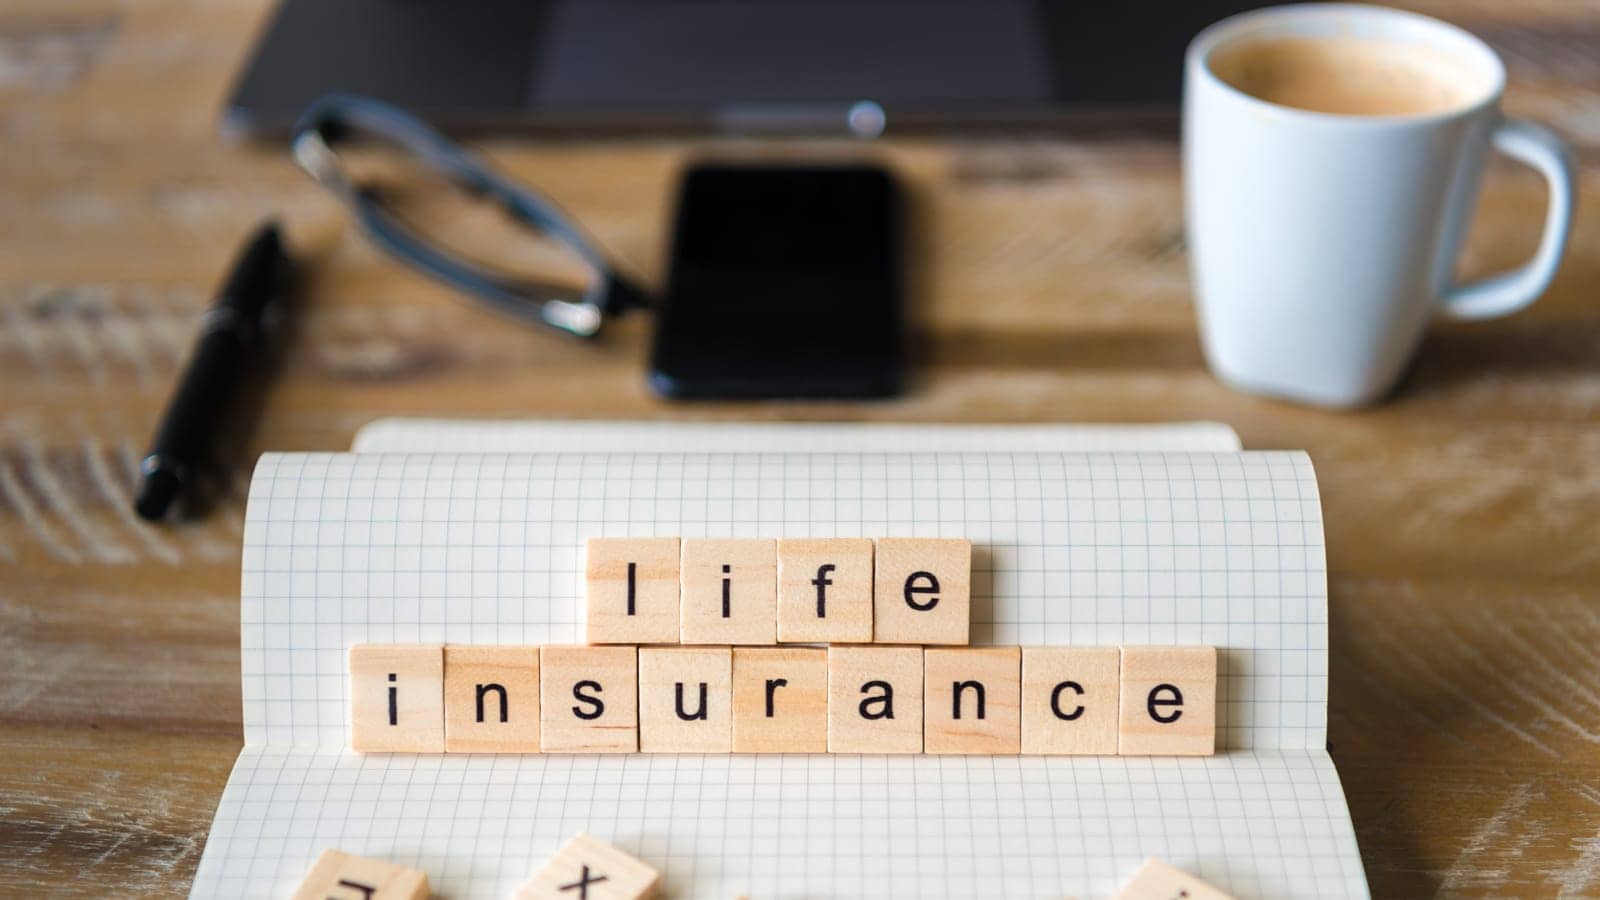 Scrabble tiles spelling out life insurance